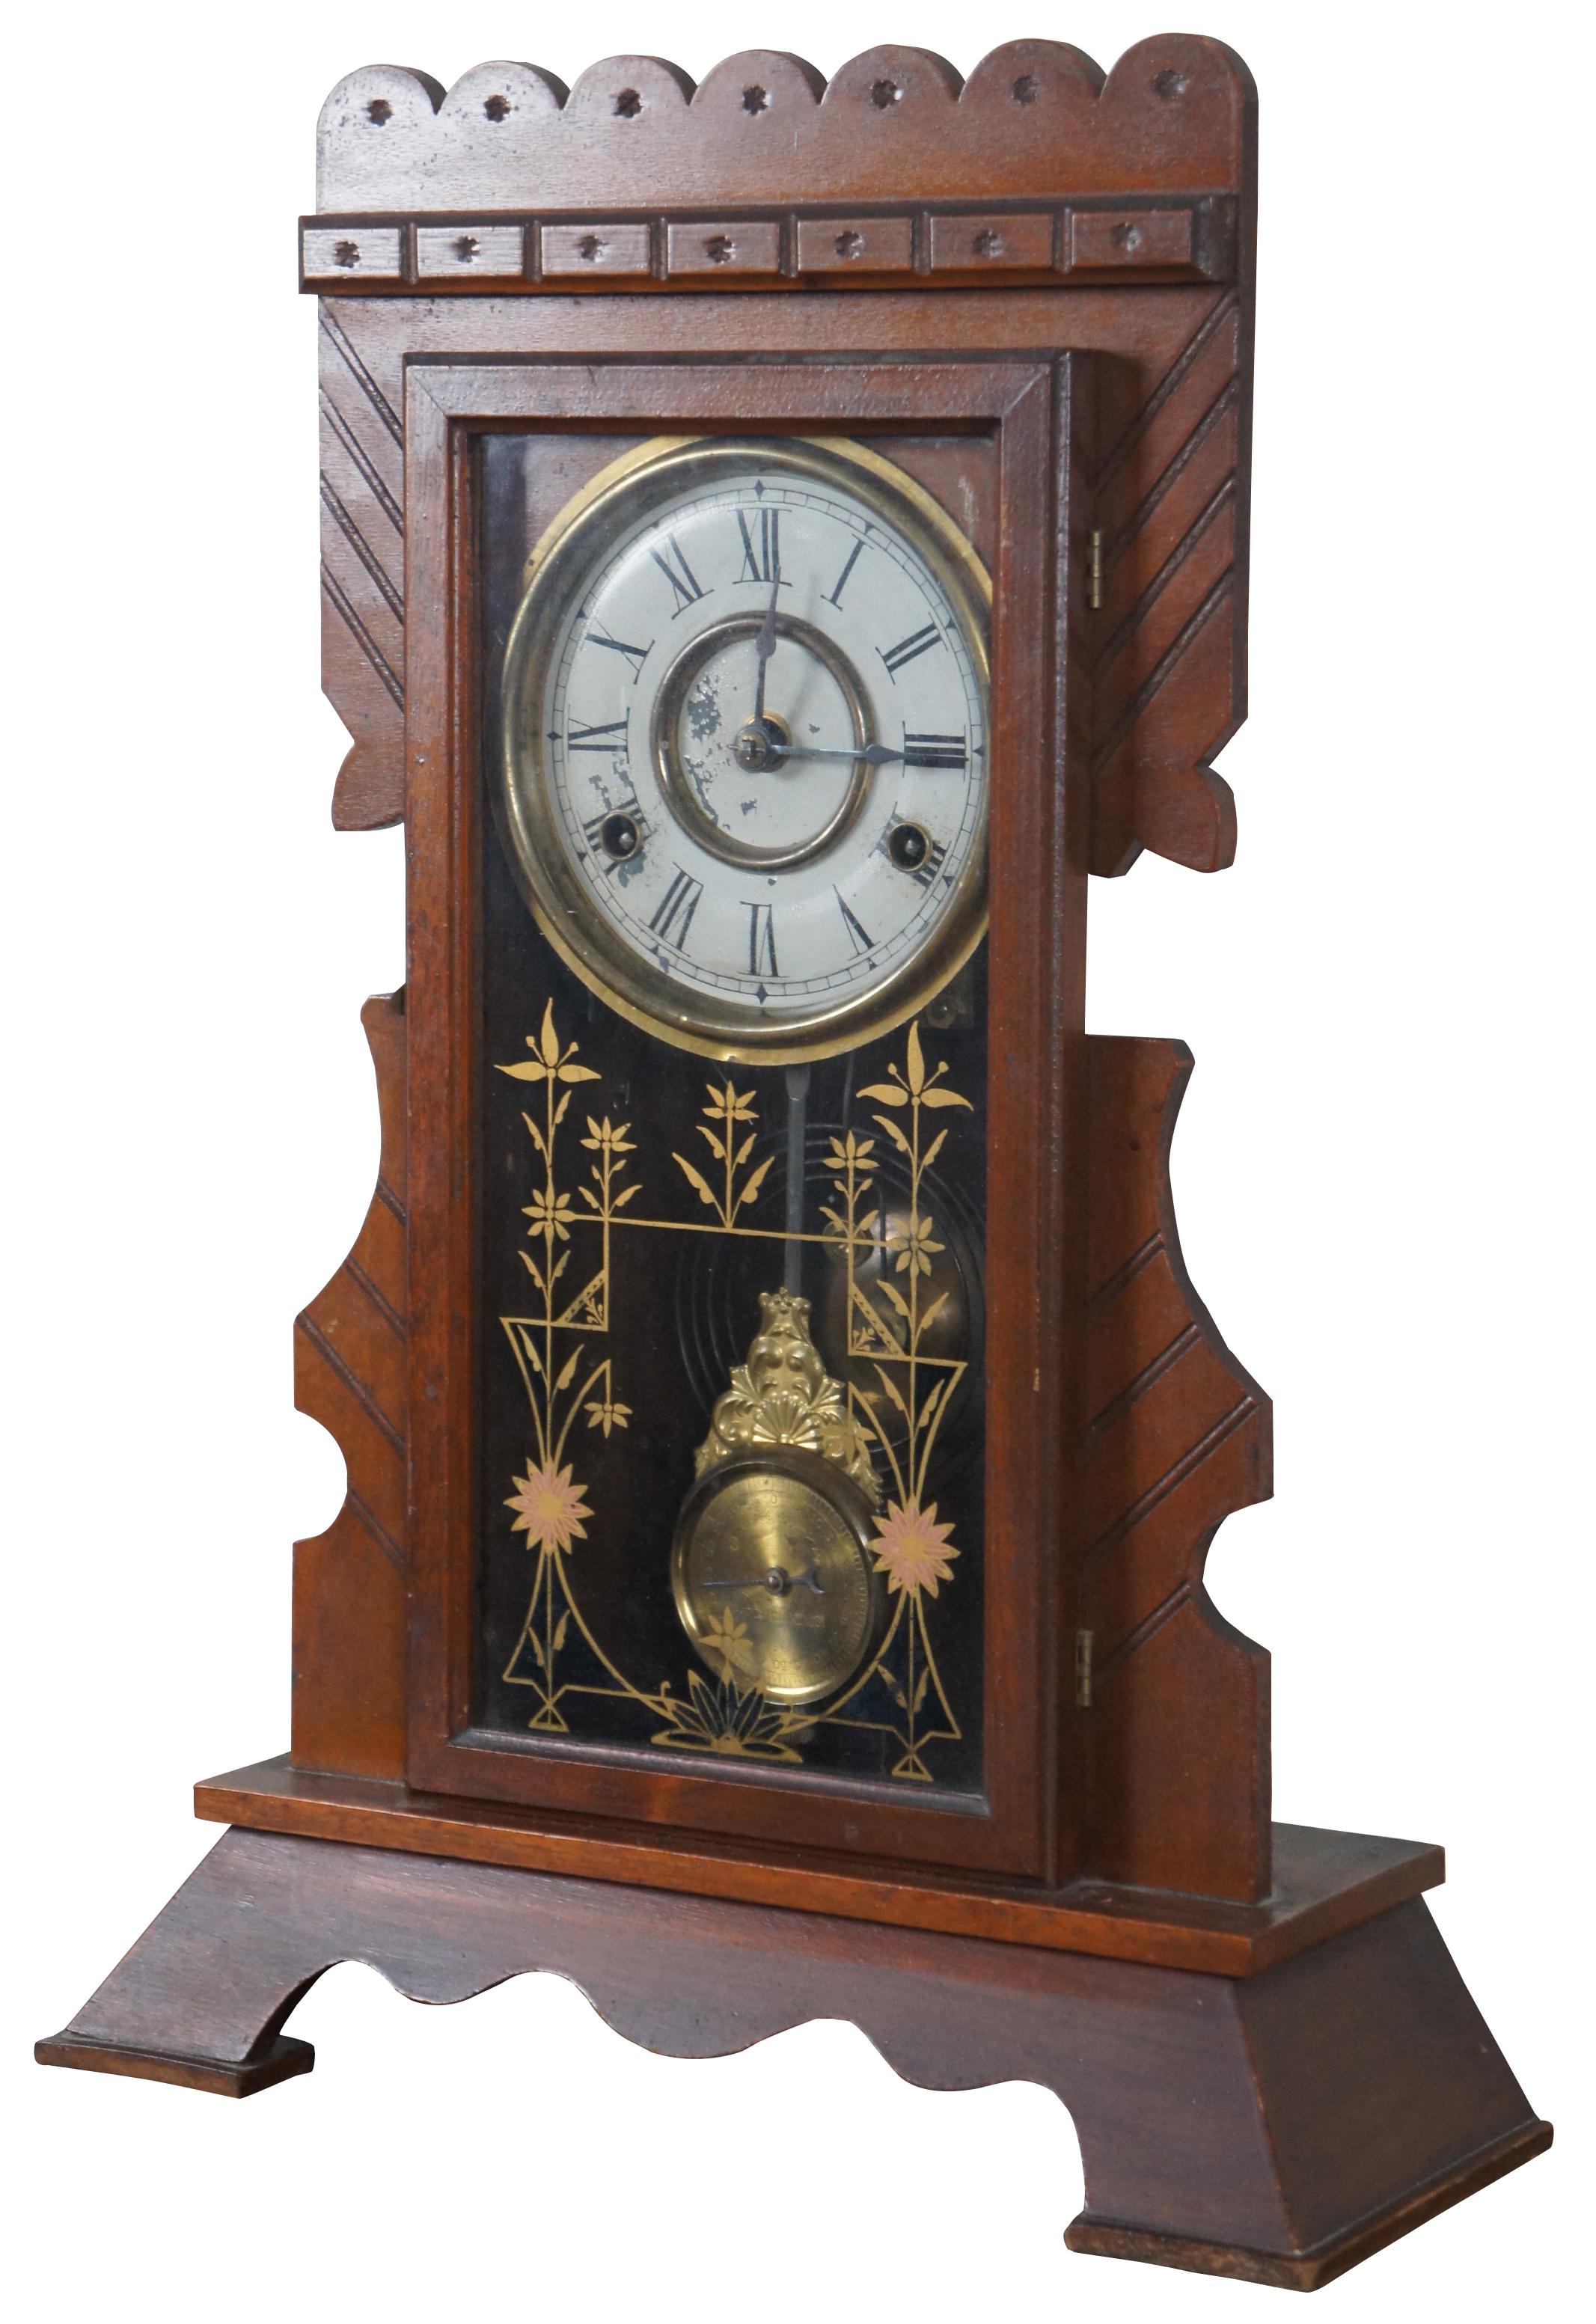 Antique New Haven Clock Company 8 day striking mantel clock model number 511 with carved walnut frame, brass pendulum, painted face and floral painted glass front, Circa 1880s.
 